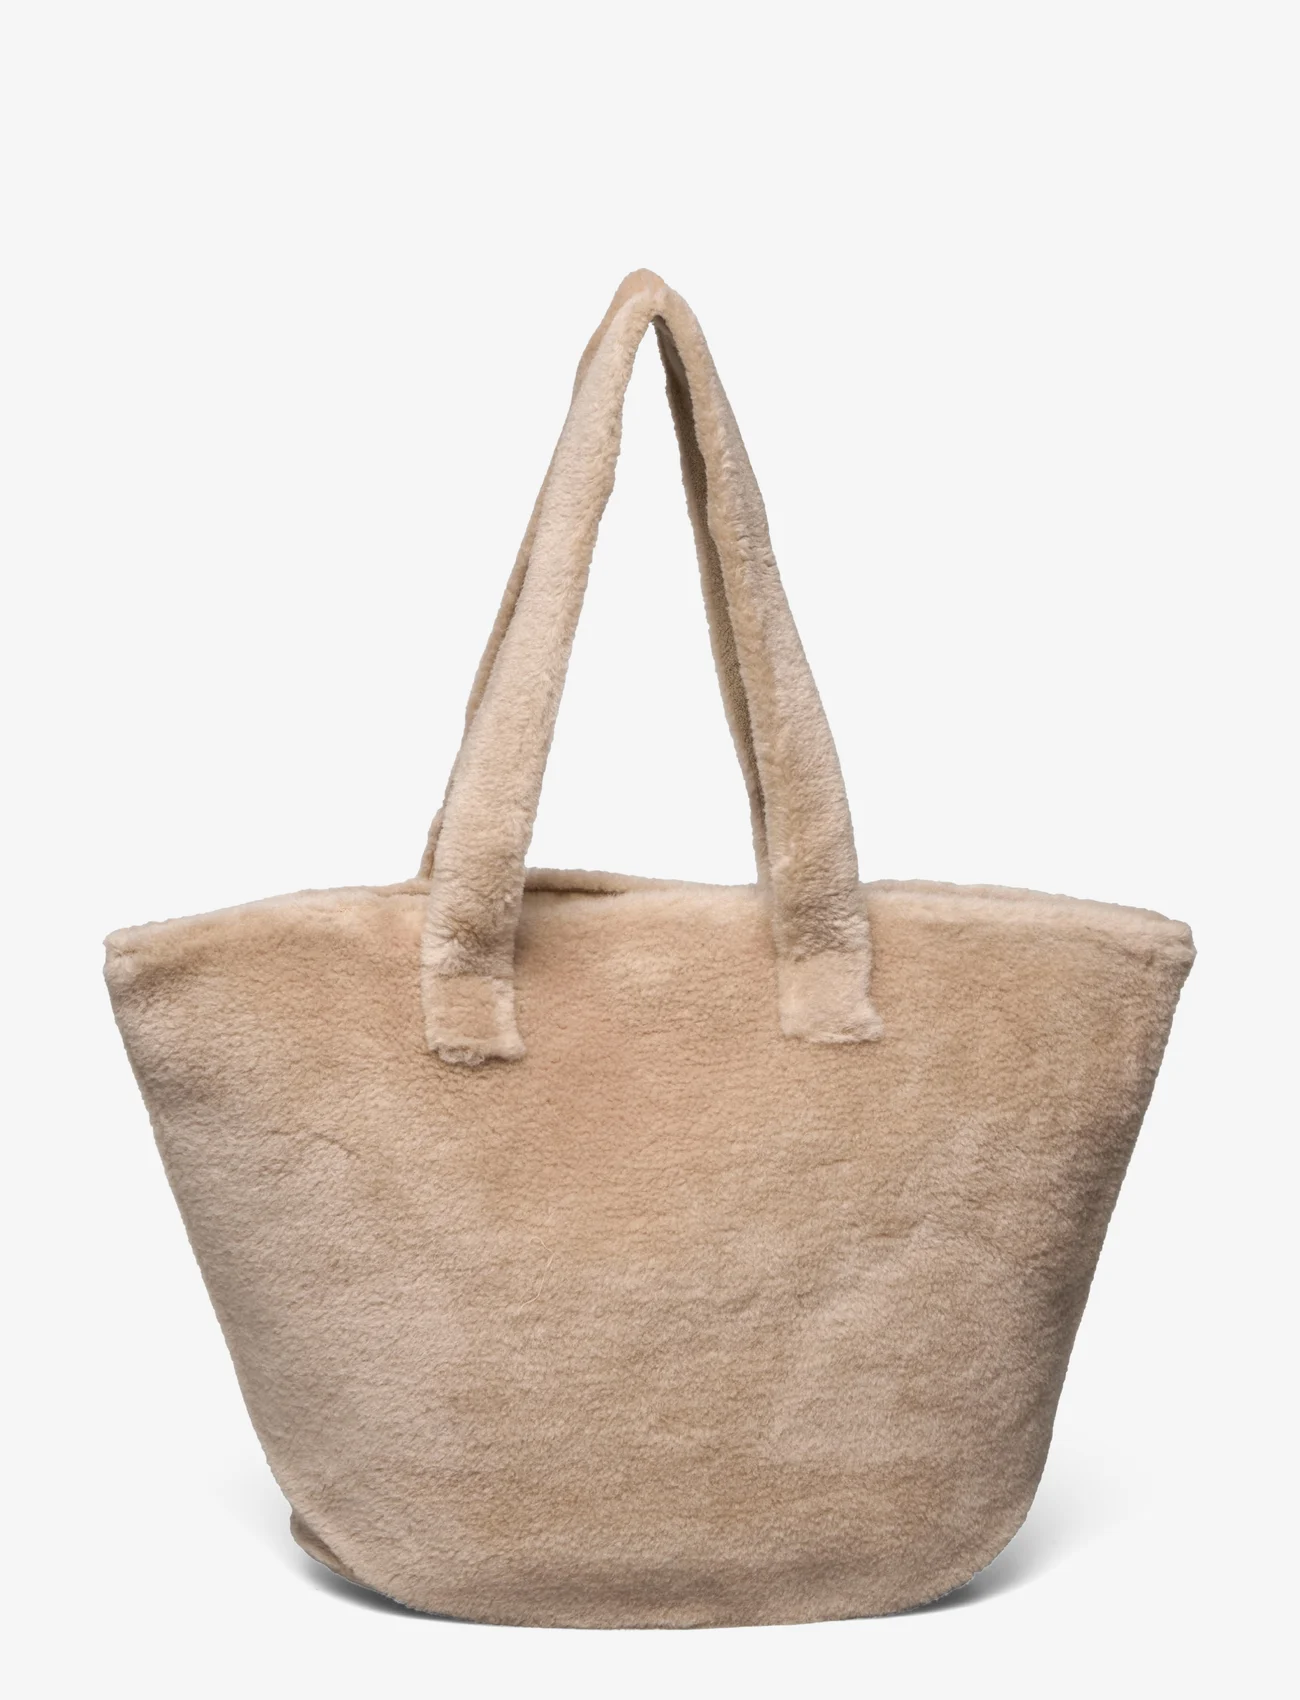 Fall Winter Spring Summer - Charlie Tote - tote bags - oatmeal - 1